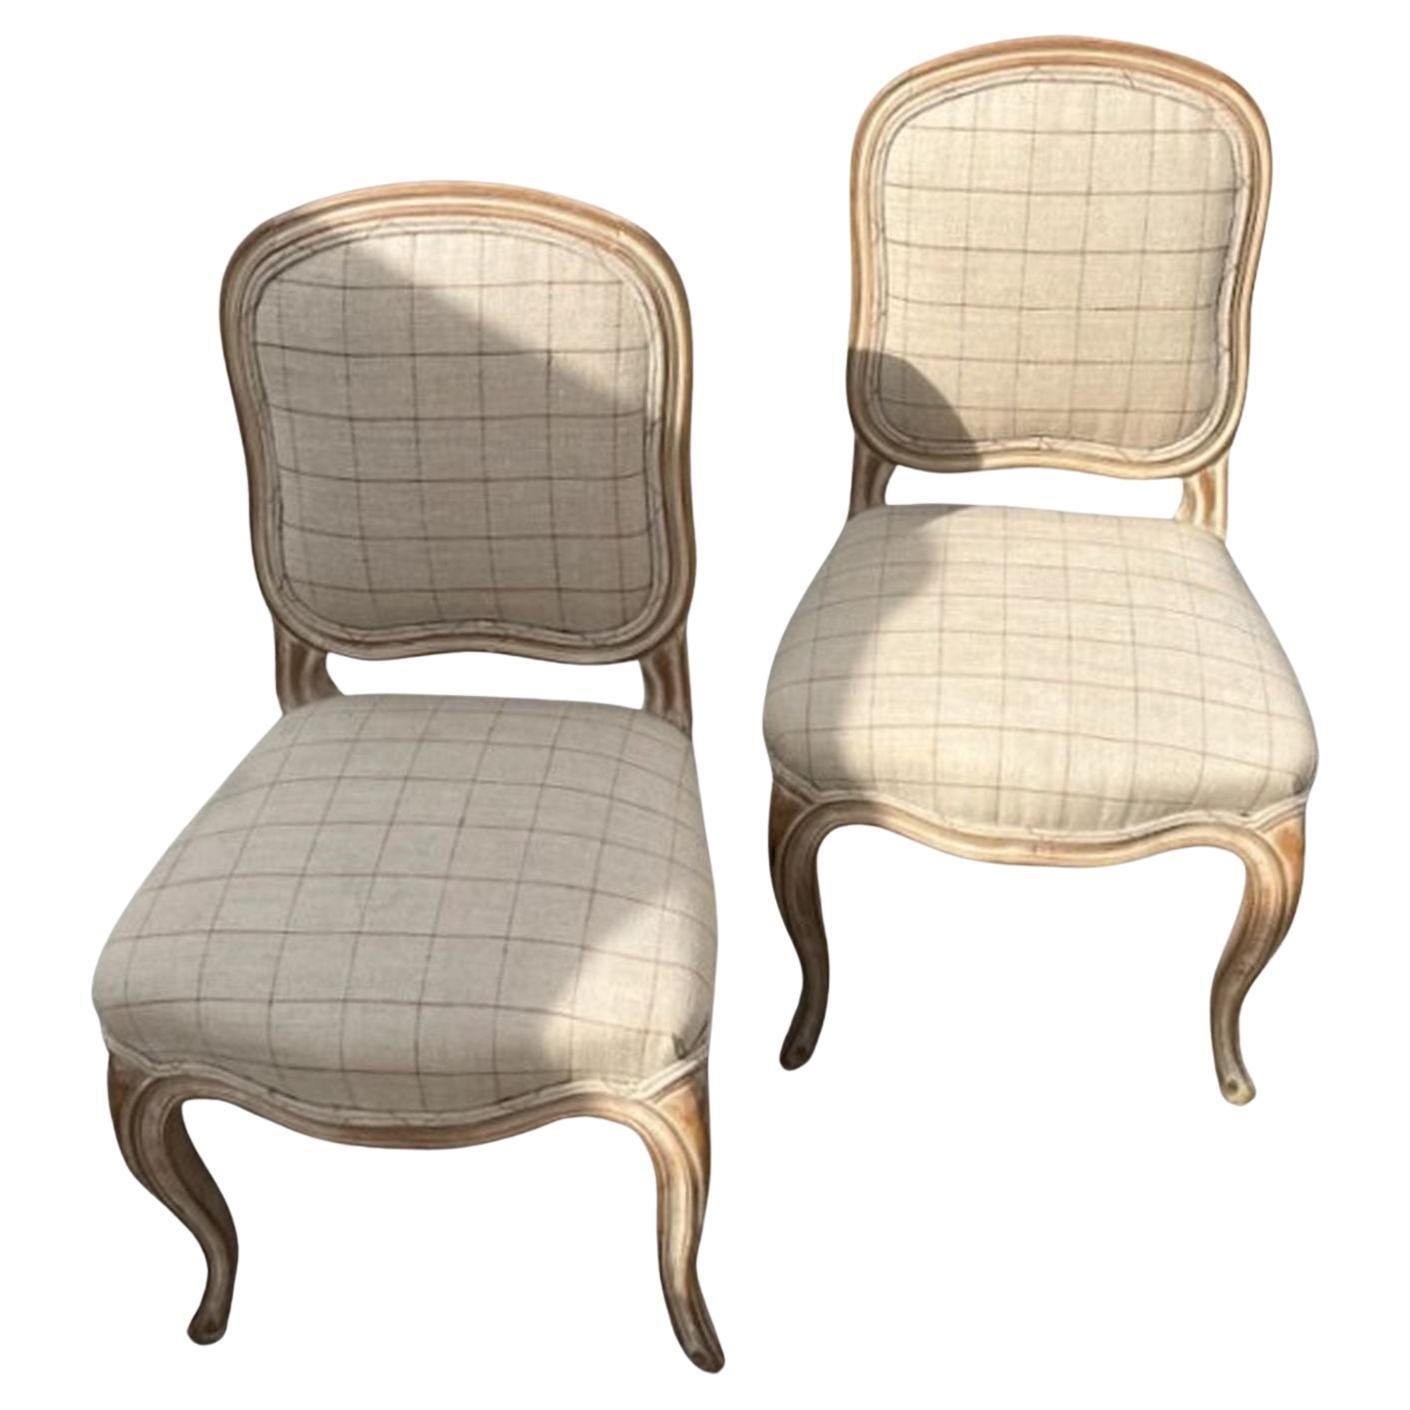 Early 20Thc French Small Chairs in Linen For Sale